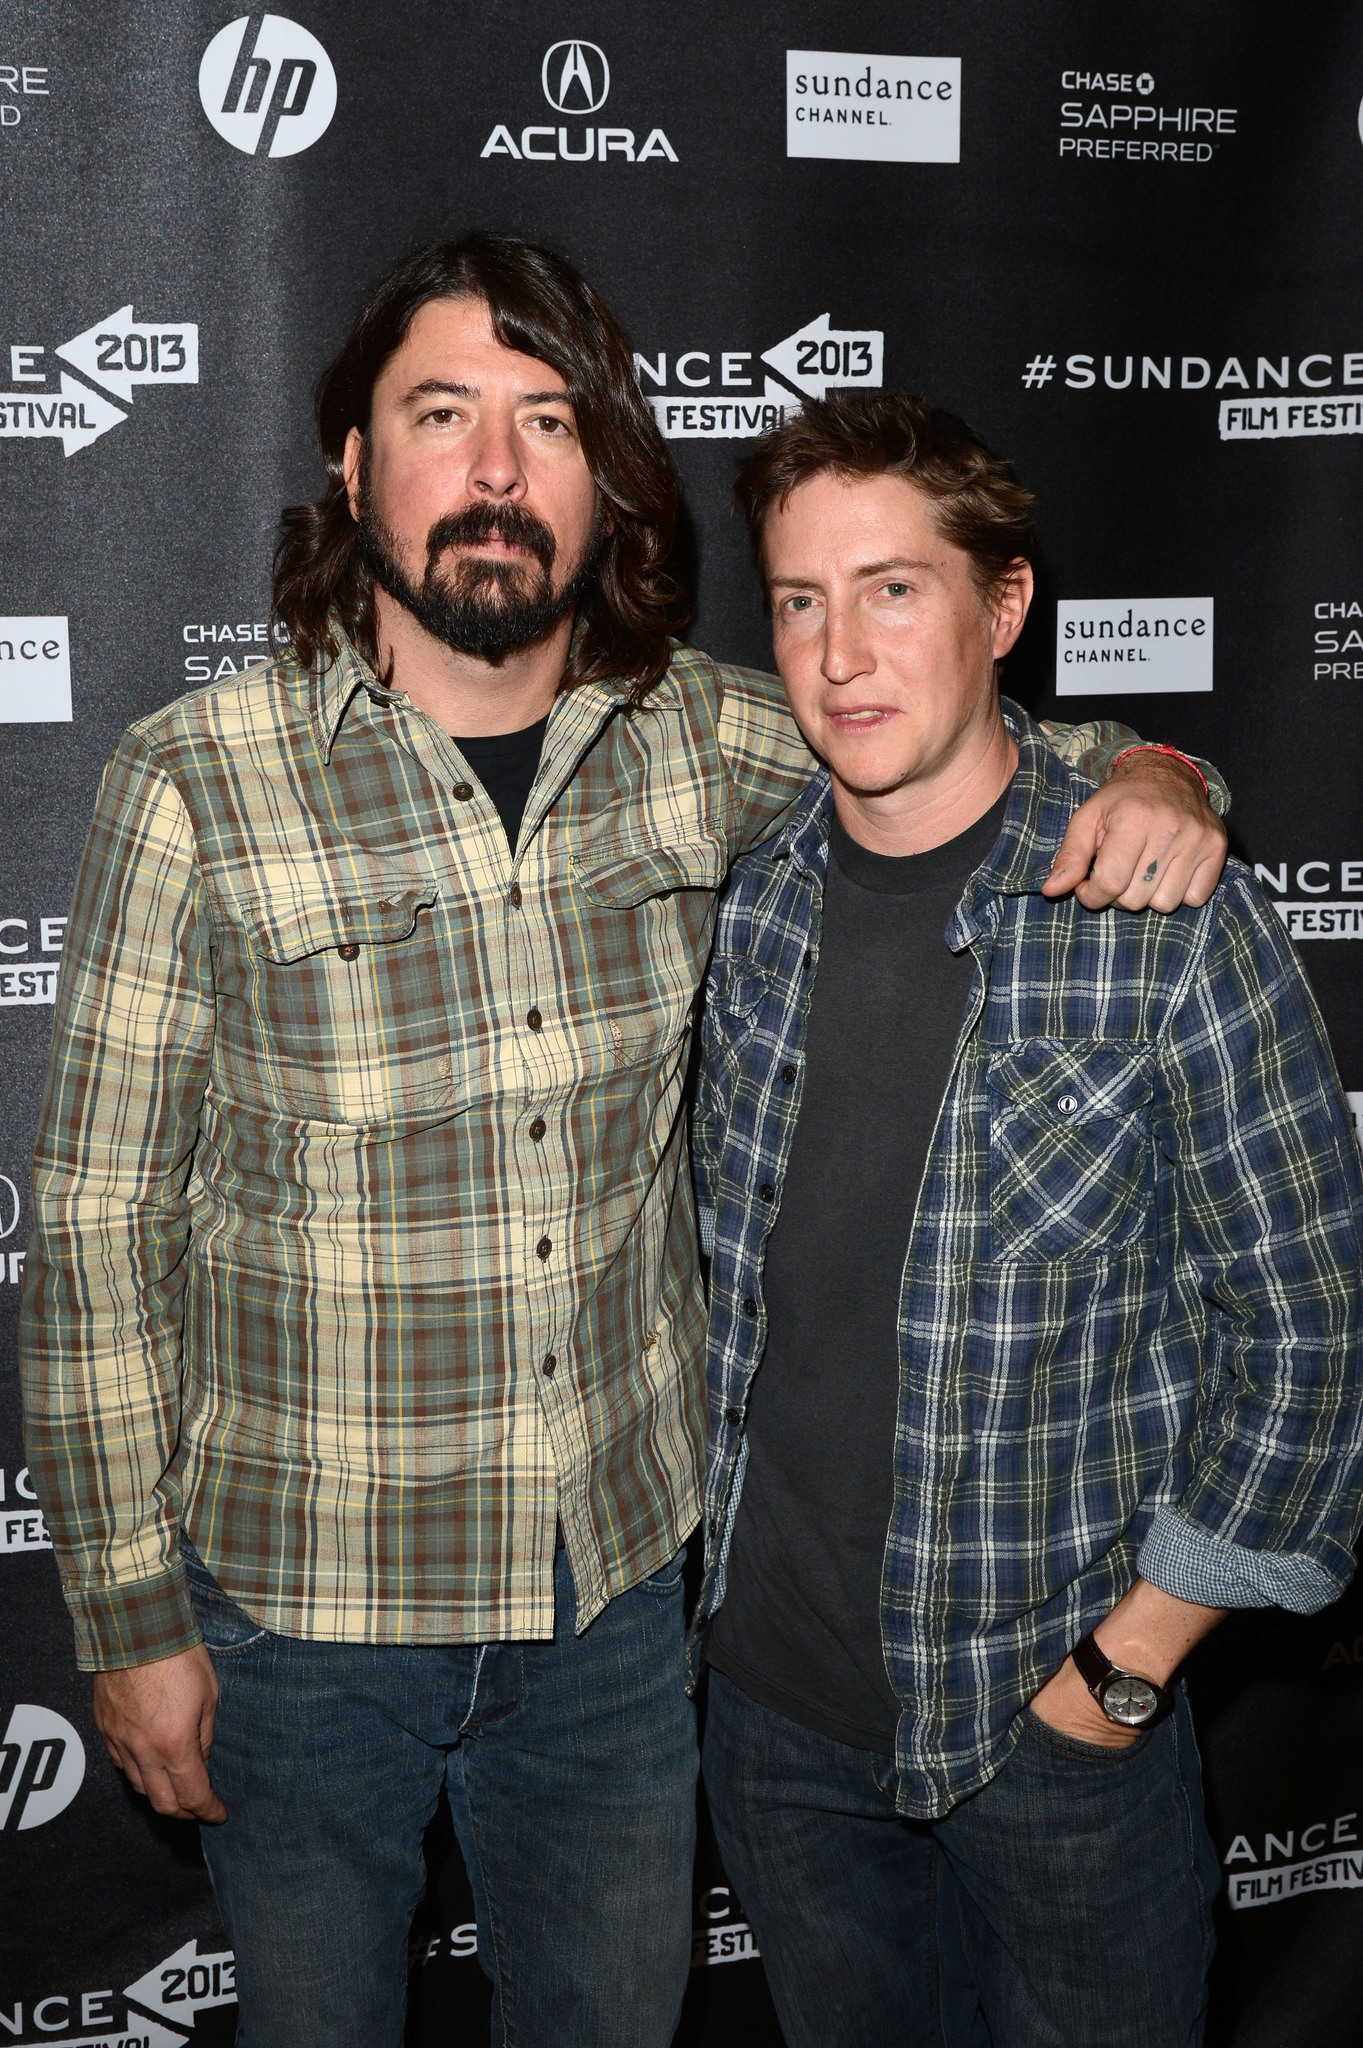 David Gordon Green and Dave Grohl